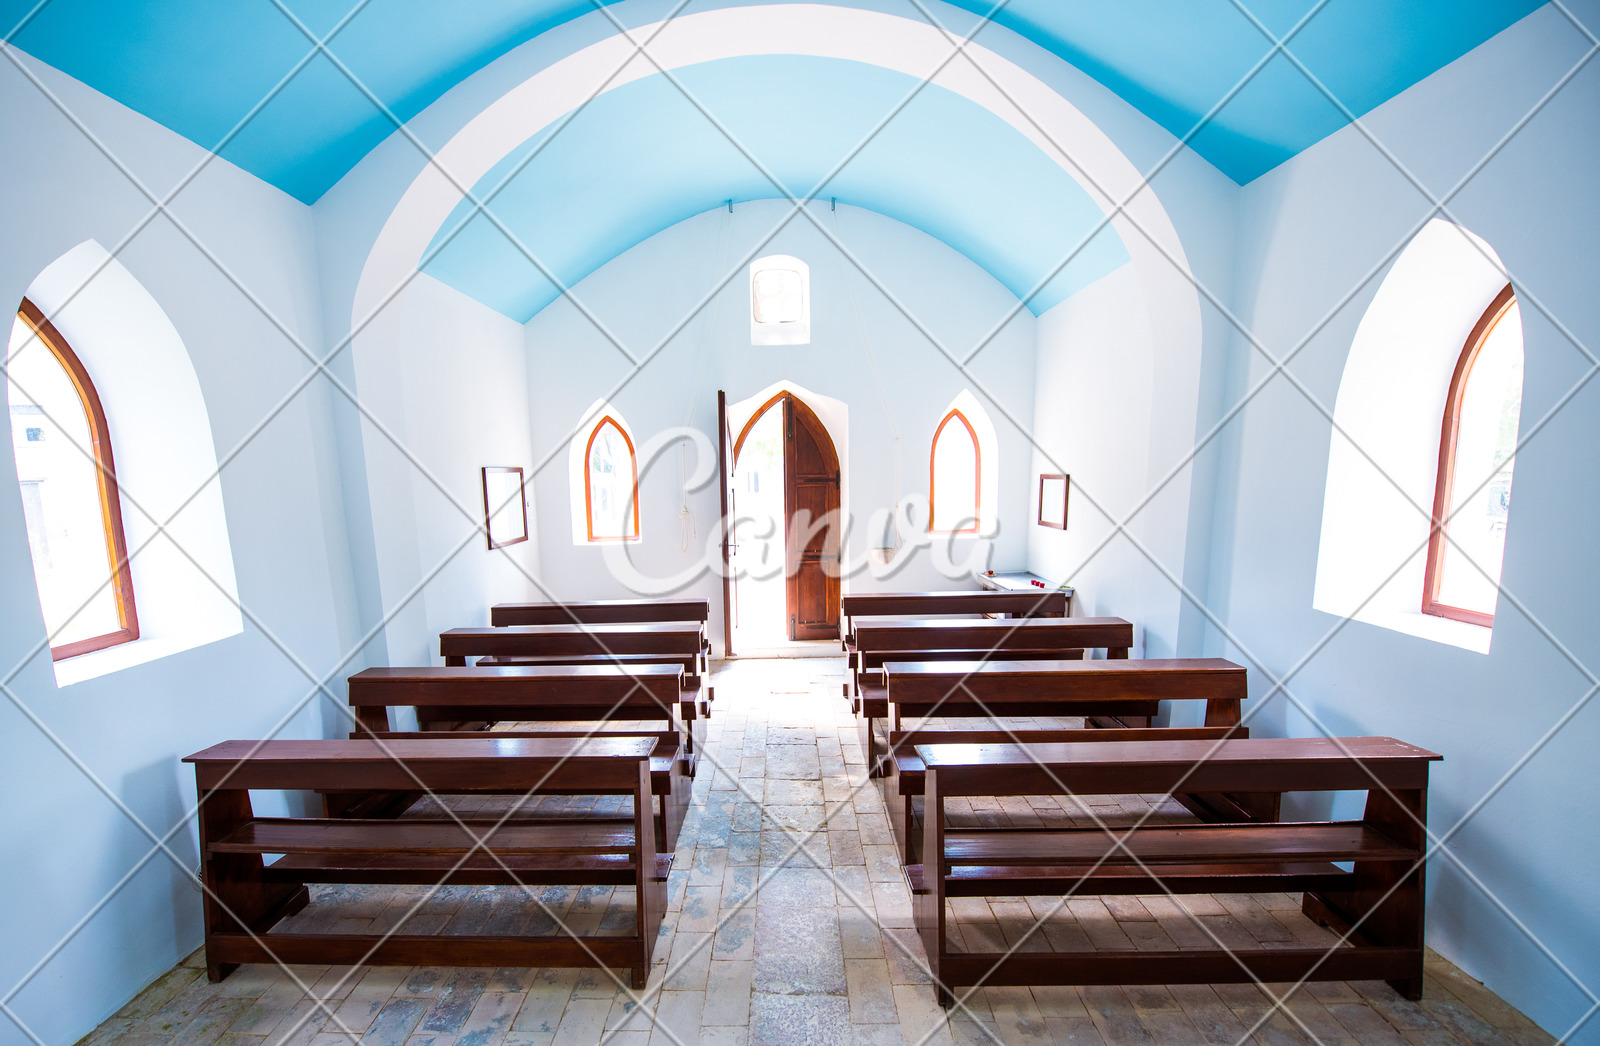 Inside Interiors Of Small Generic Church Photos By Canva